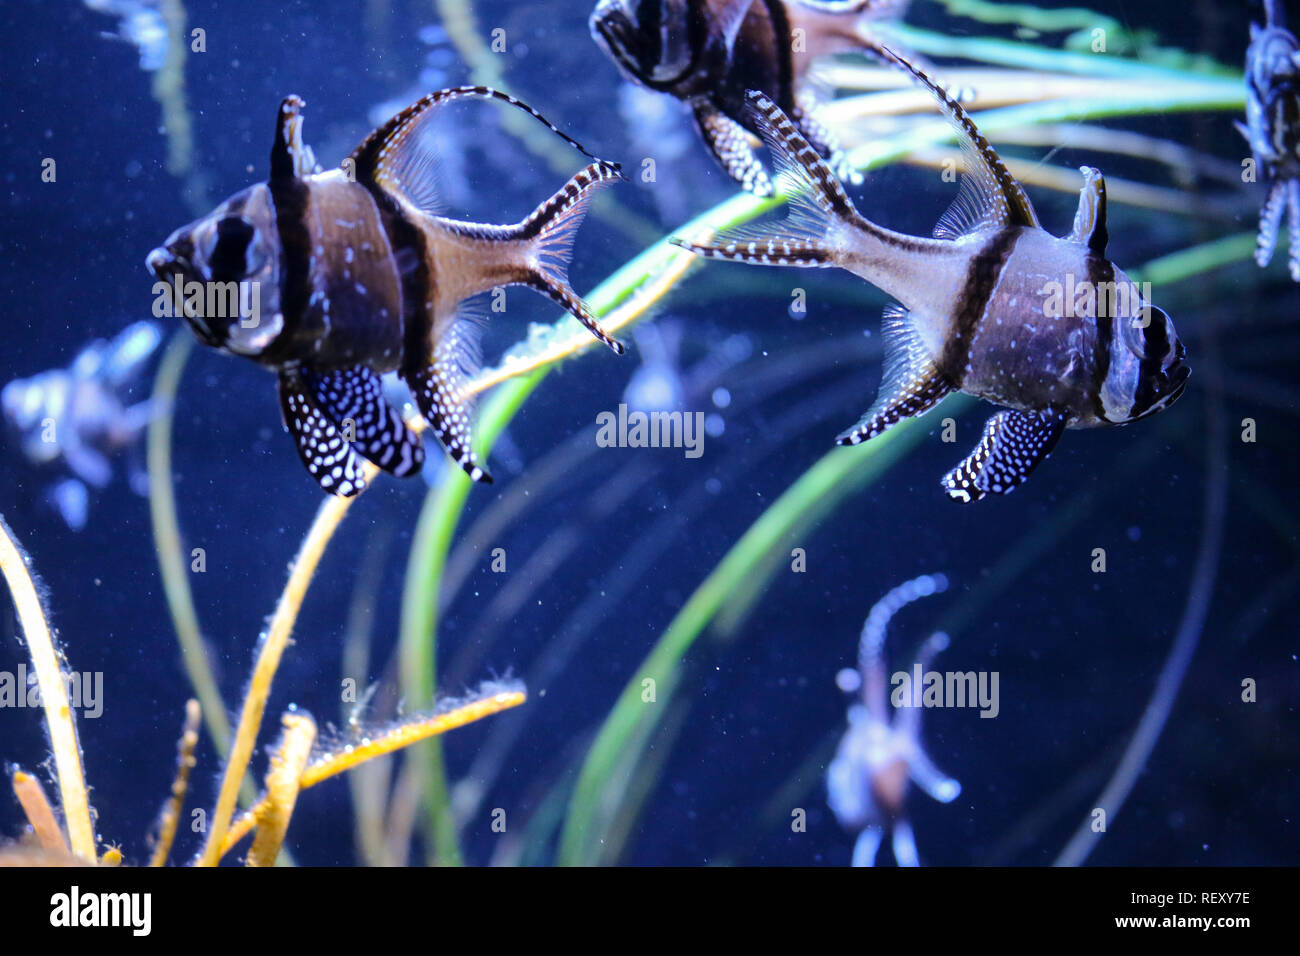 Group of Exotic tropical angel fish in the Seattle Aquarium that have black stripes with small white dotted markings Stock Photo